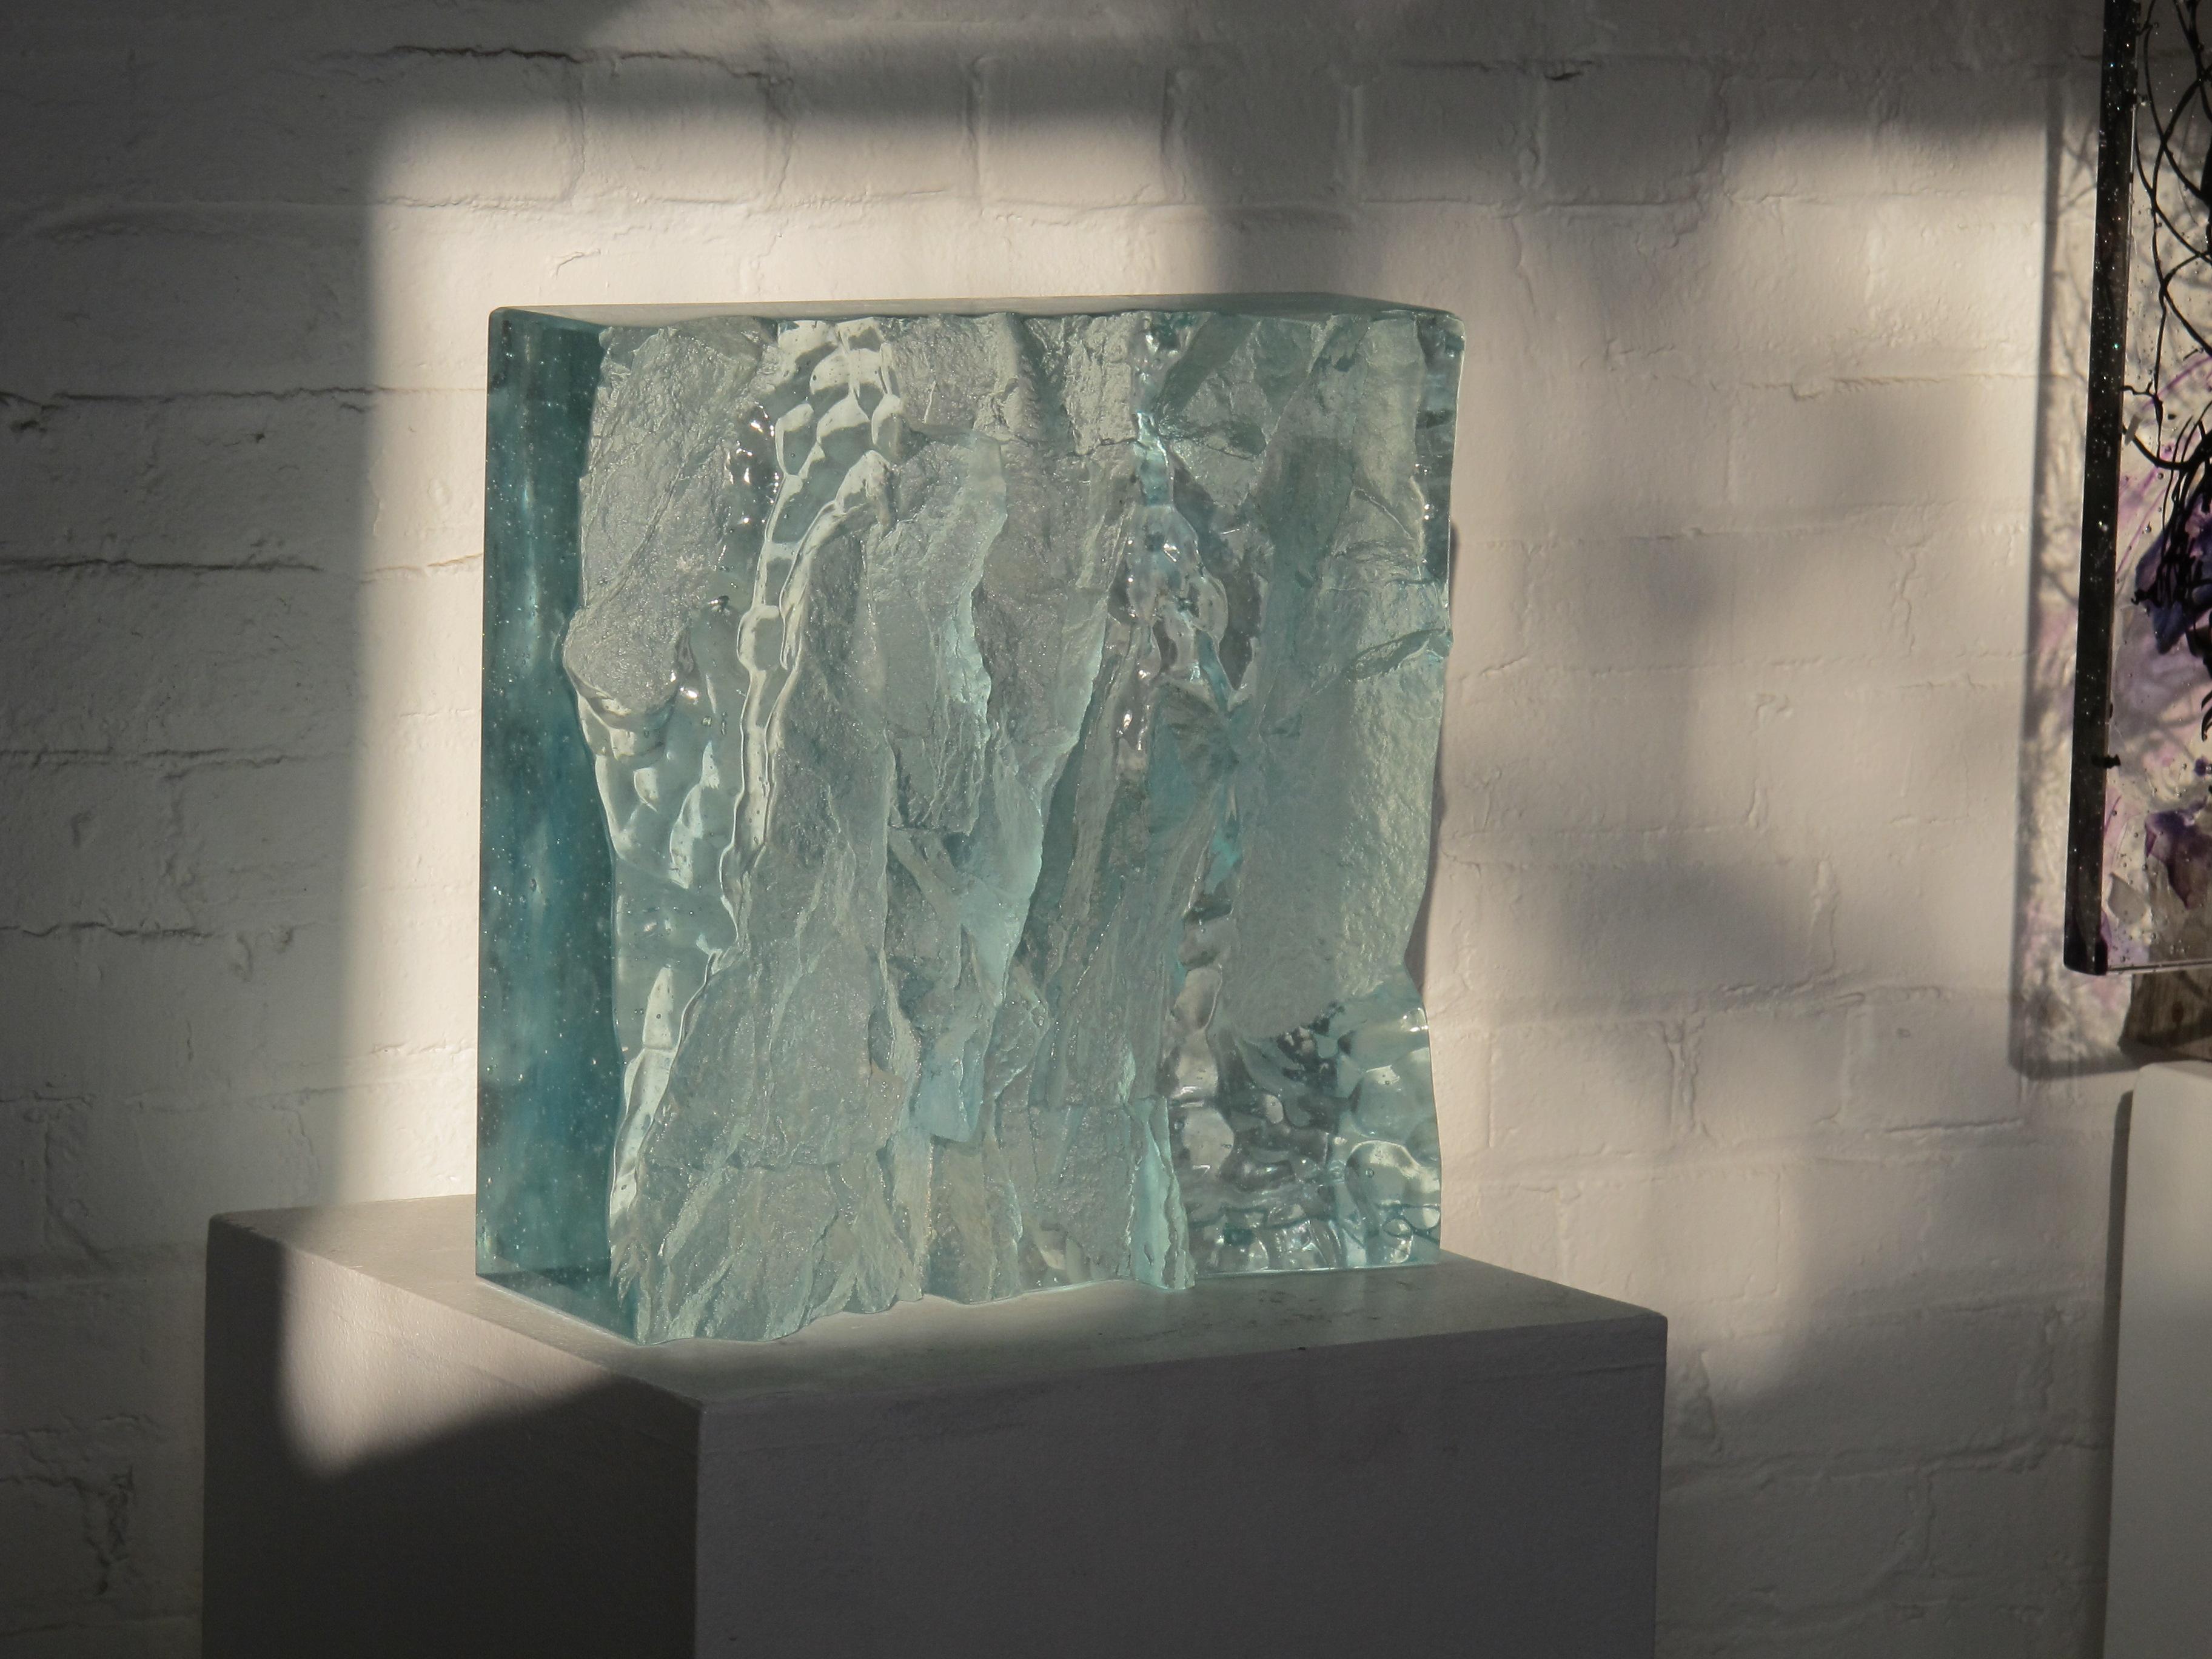 Contemporary Cast Glass Sculpture, 'Norsel 2', 2011 by David Ruth For Sale 4